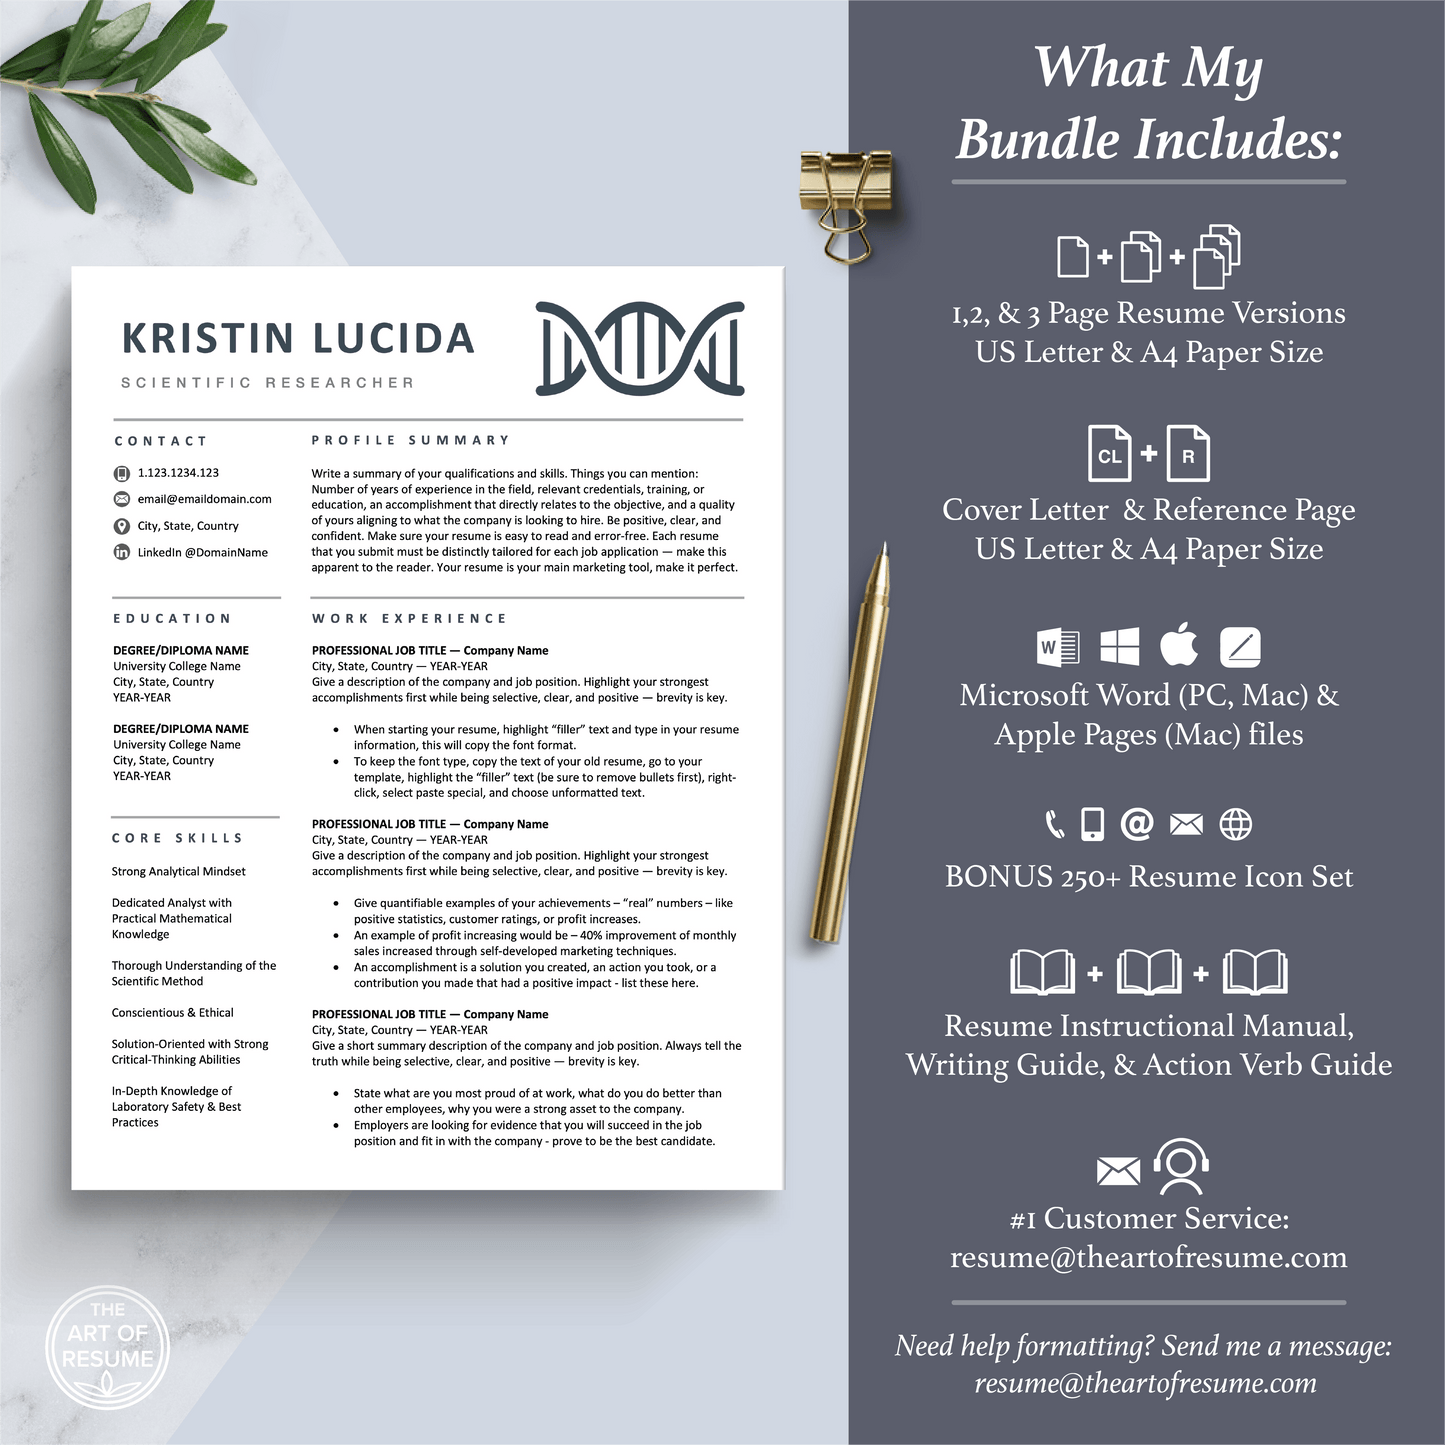 The Art of Resume Templates |  Scientist, Biochemist, Lab Researcher, Student, Teacher DNA Helix Resume CV Template Maker 3, Cover Letter, Reference Page, Mac, PC, A4 Paper, US size, Free Guide, The Art of Resume Writing, 250 Bonus Resume Icons